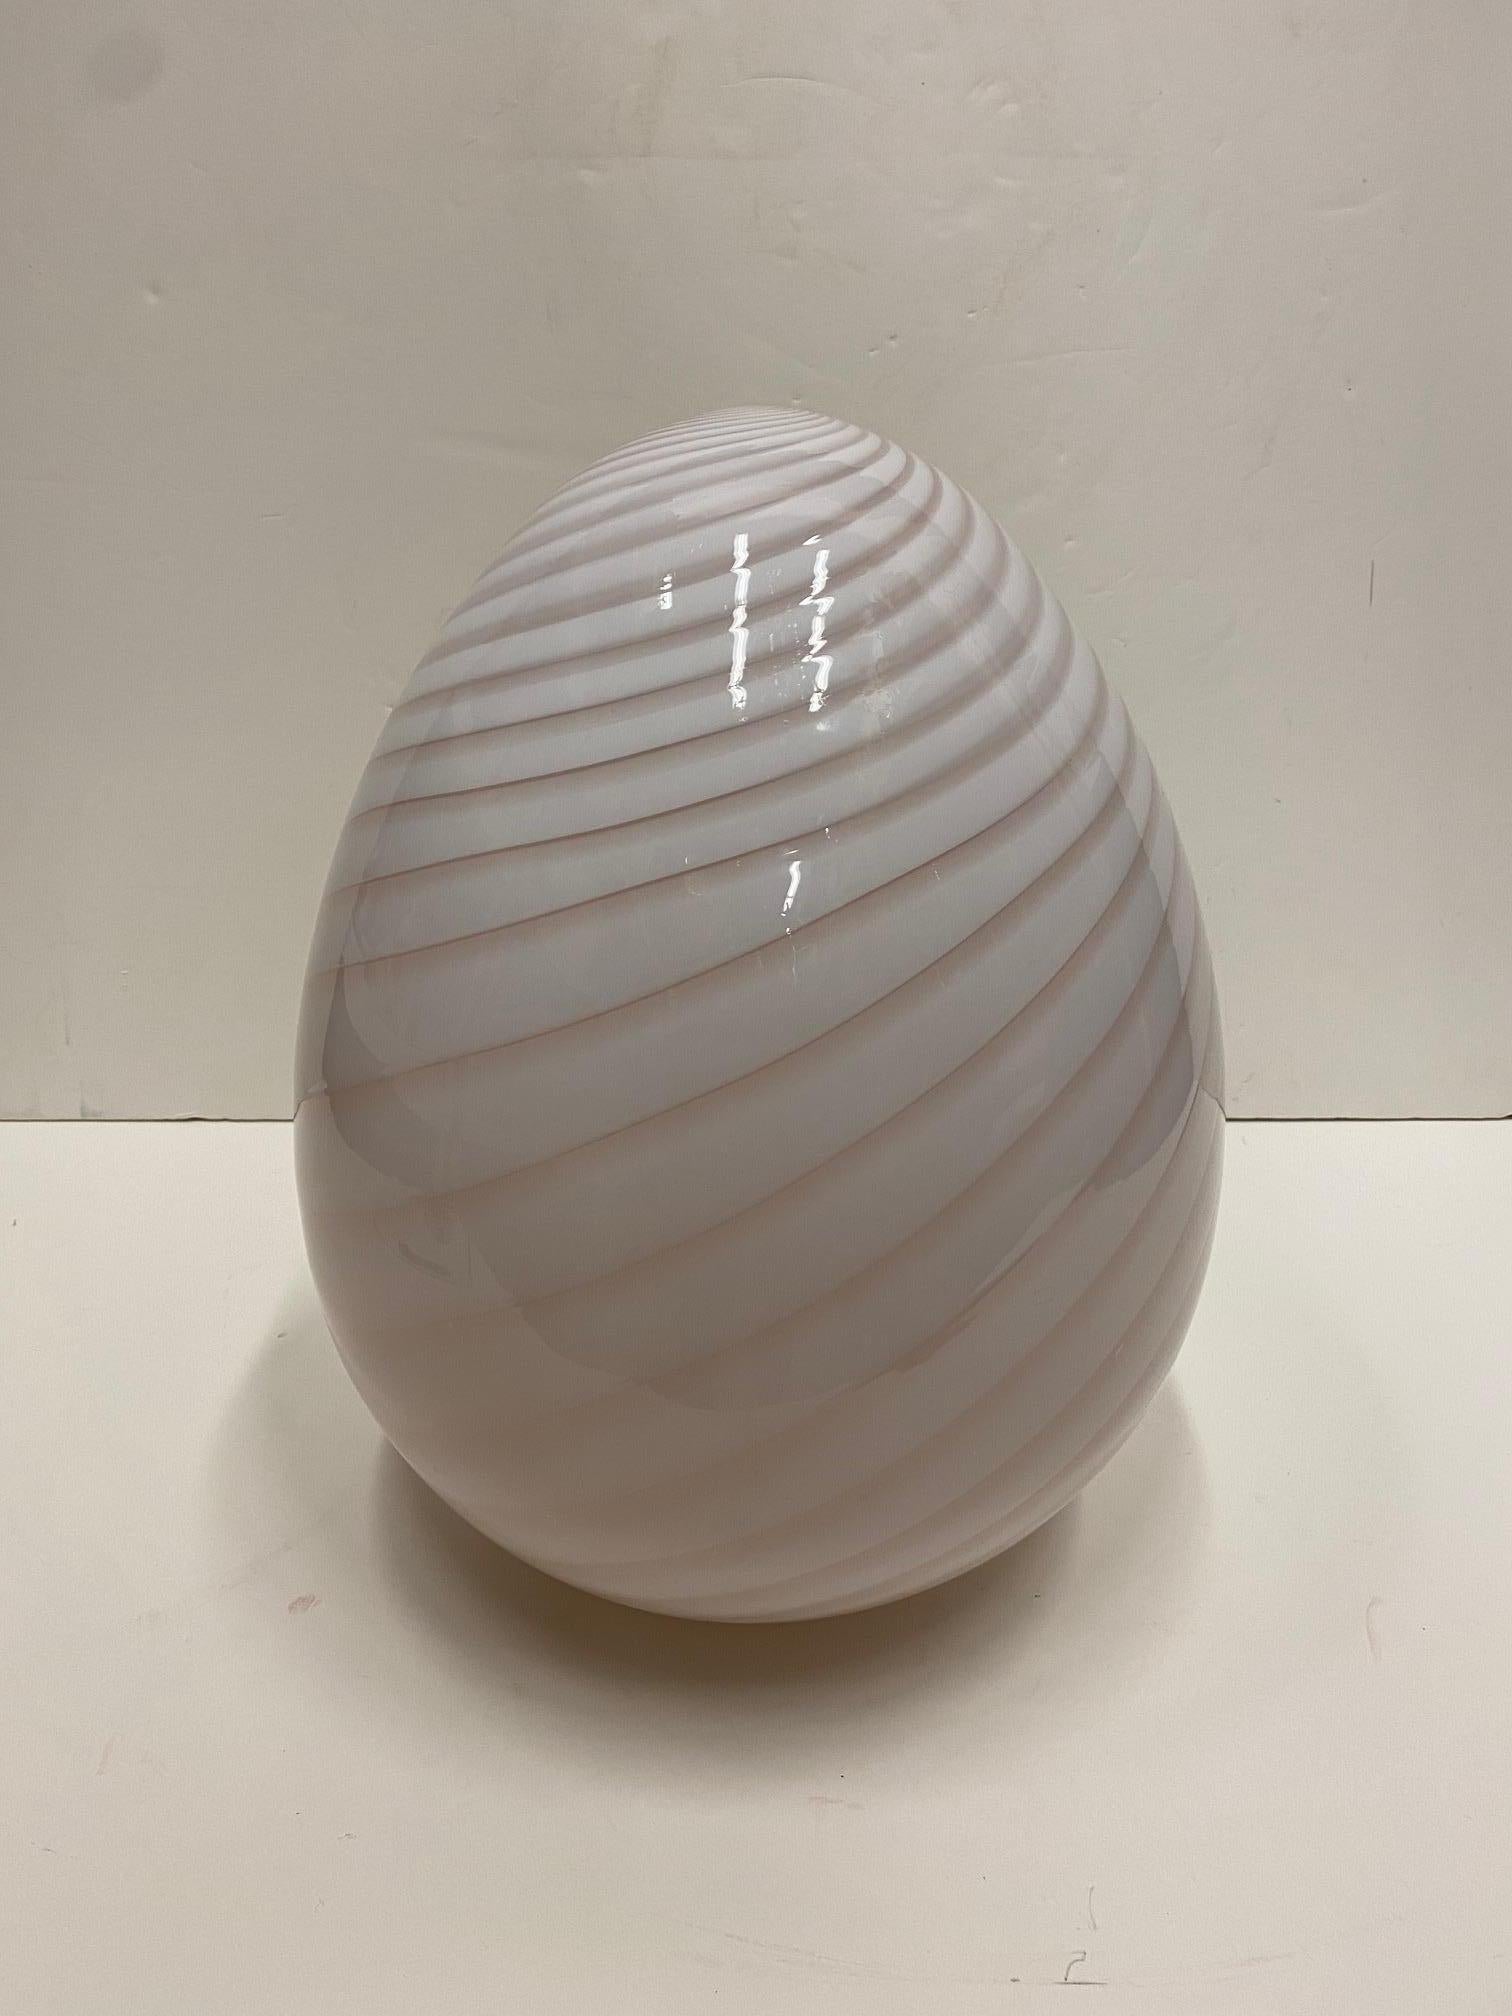 Gorgeous table light by Fulvio Bianconi for Venini in the sensual shape of an egg having spiral lines in the glass. When lit the lamp has a romantic pink cast. 

Note: A second slightly smaller egg lamp is also available.